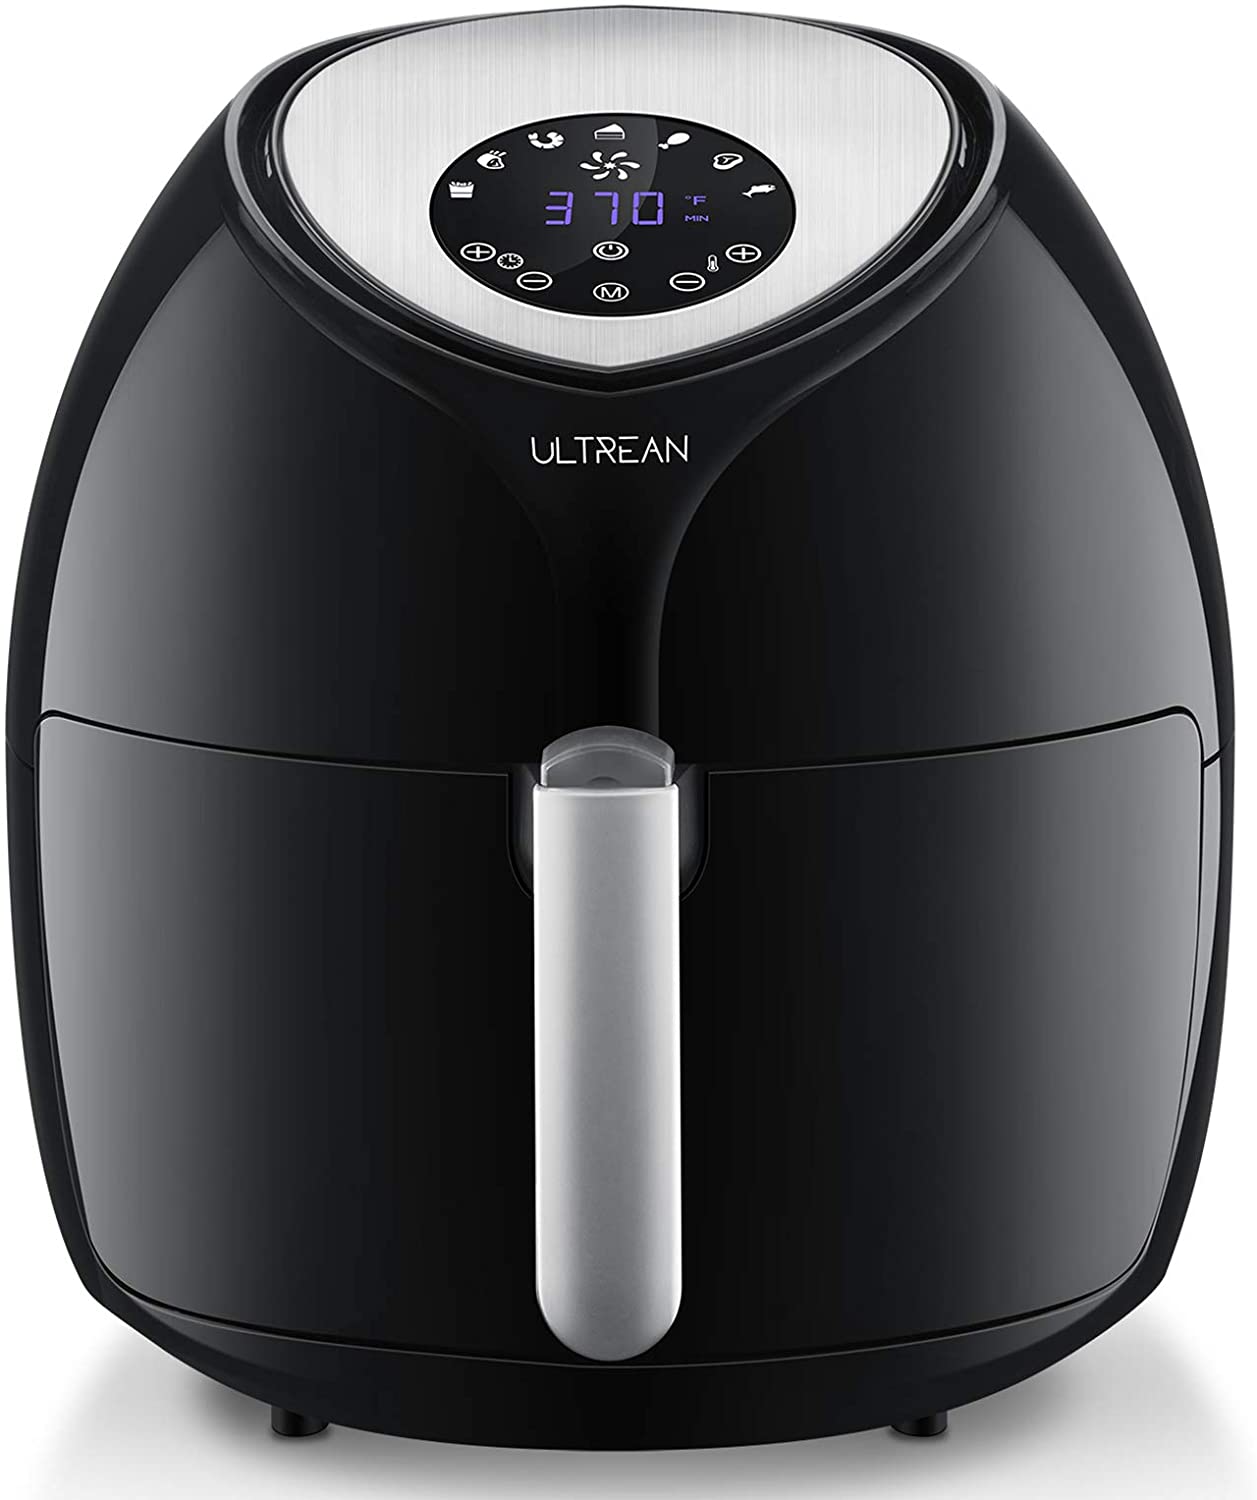 Ultrean 6 Quart Air Fryer, Large Family Size Electric Hot ...